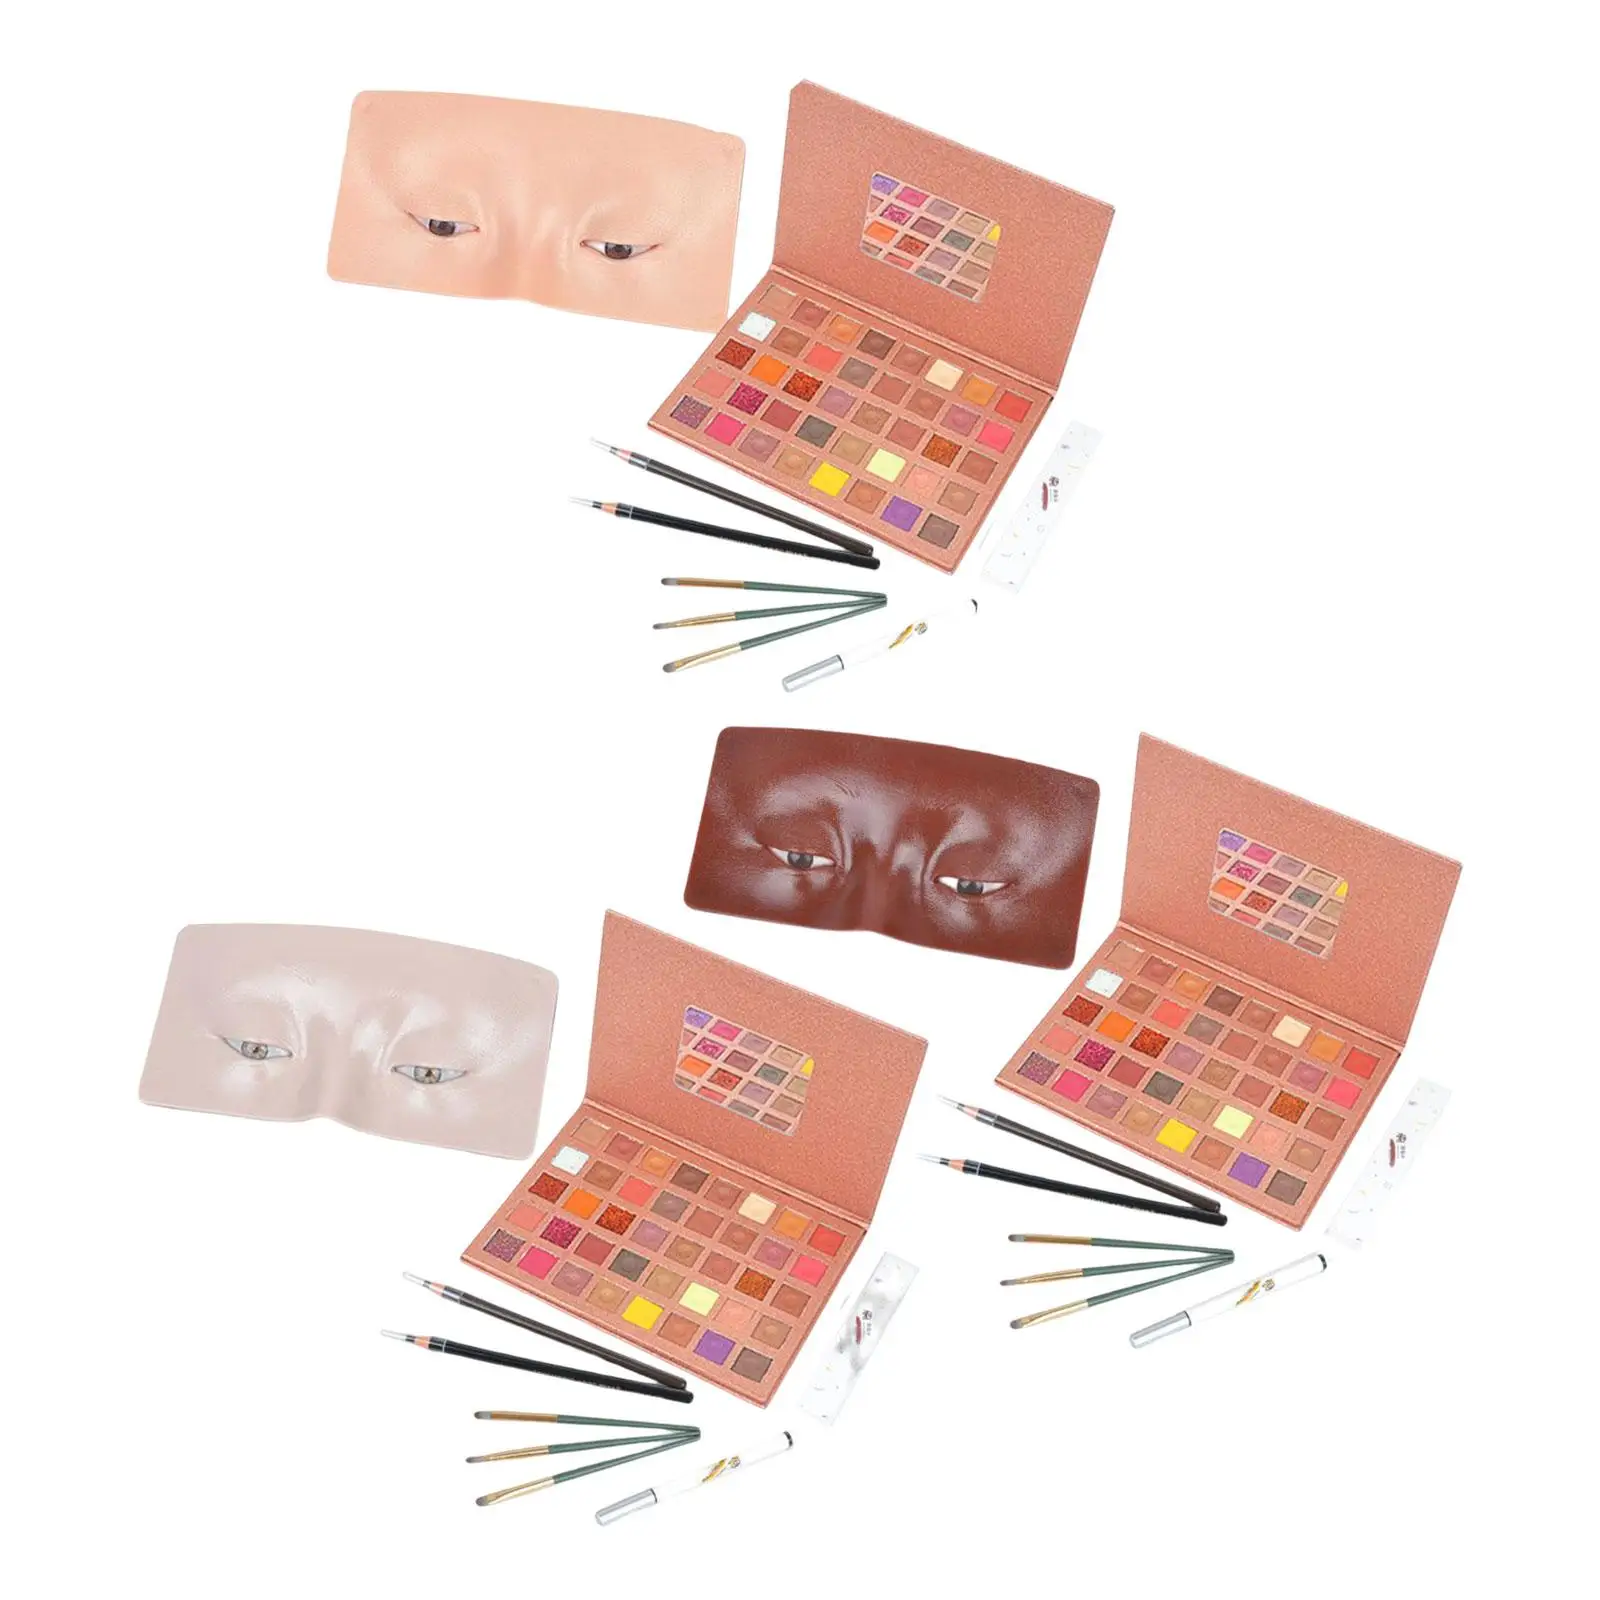 Practice Face Plate Multifunctional Silicone Portable Simulation Skin Model Durable Eye Makeup Beautician Salon Cosmetology